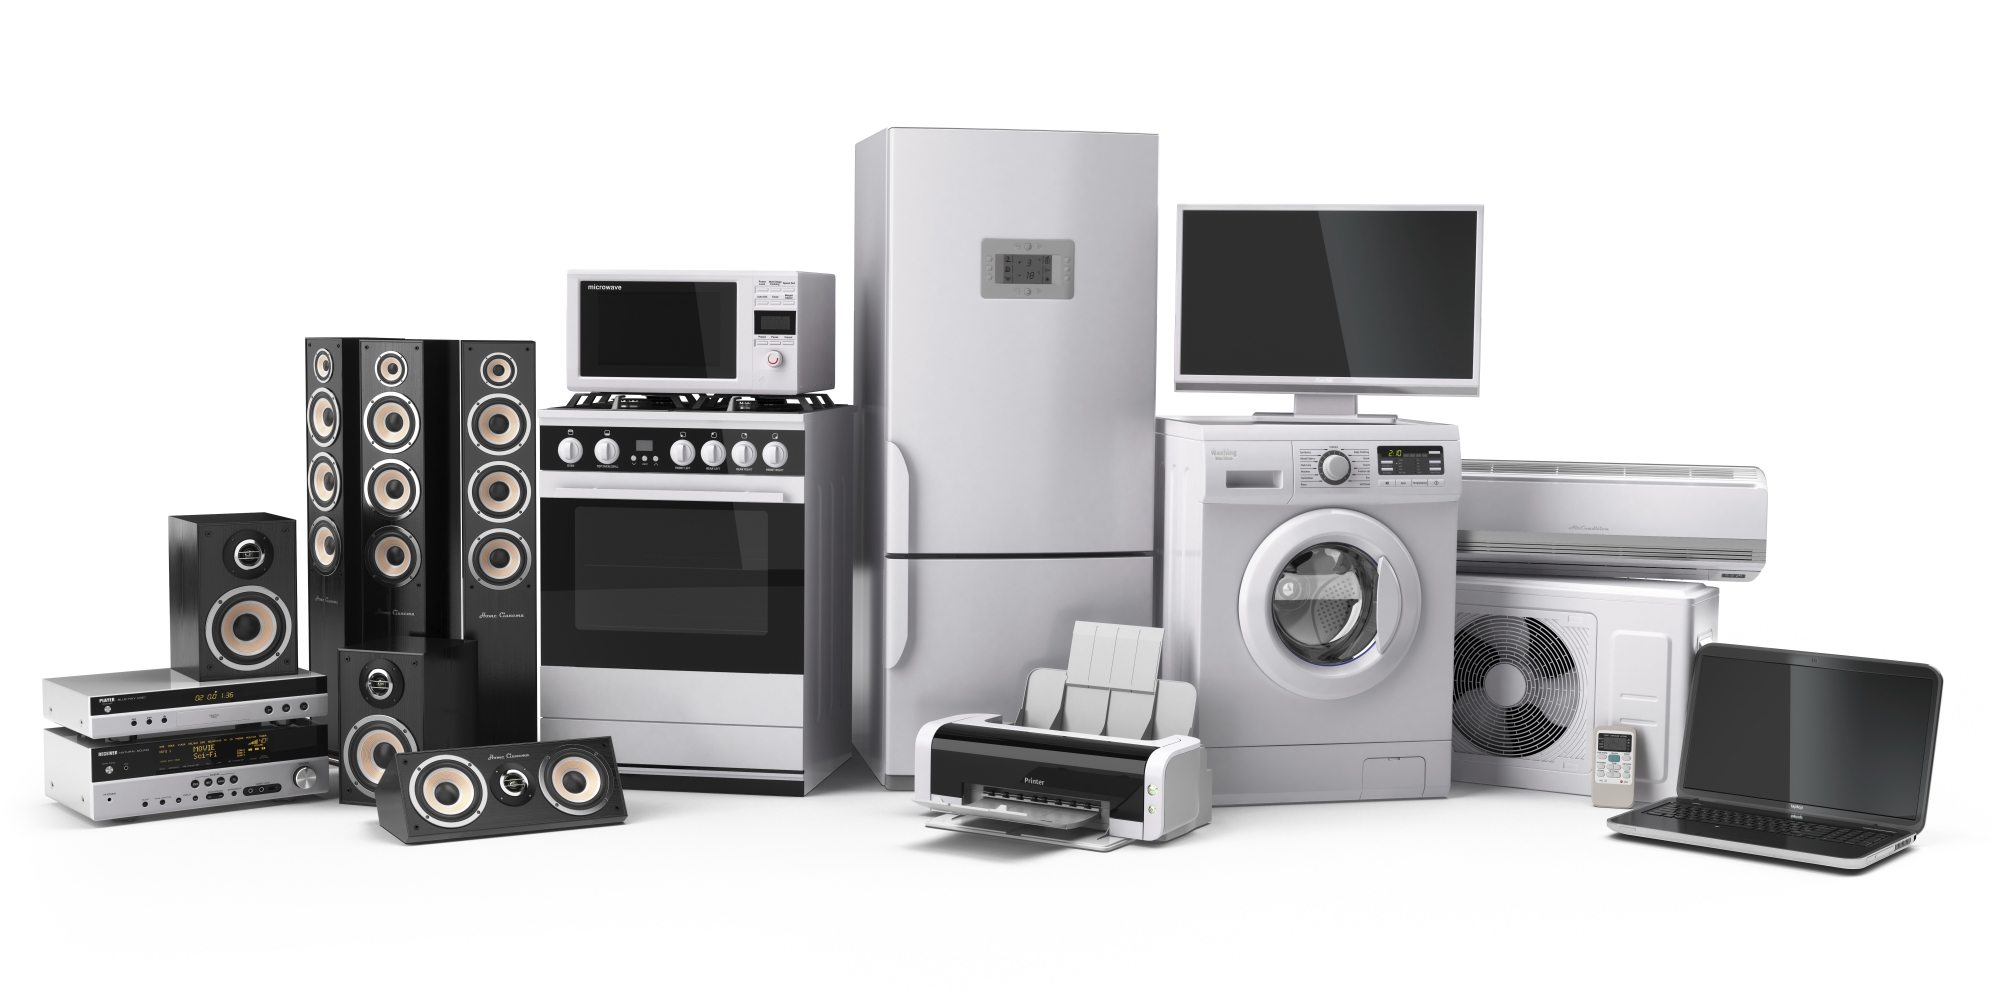 Upgrading Your Home Appliances: When to Repair or Replace